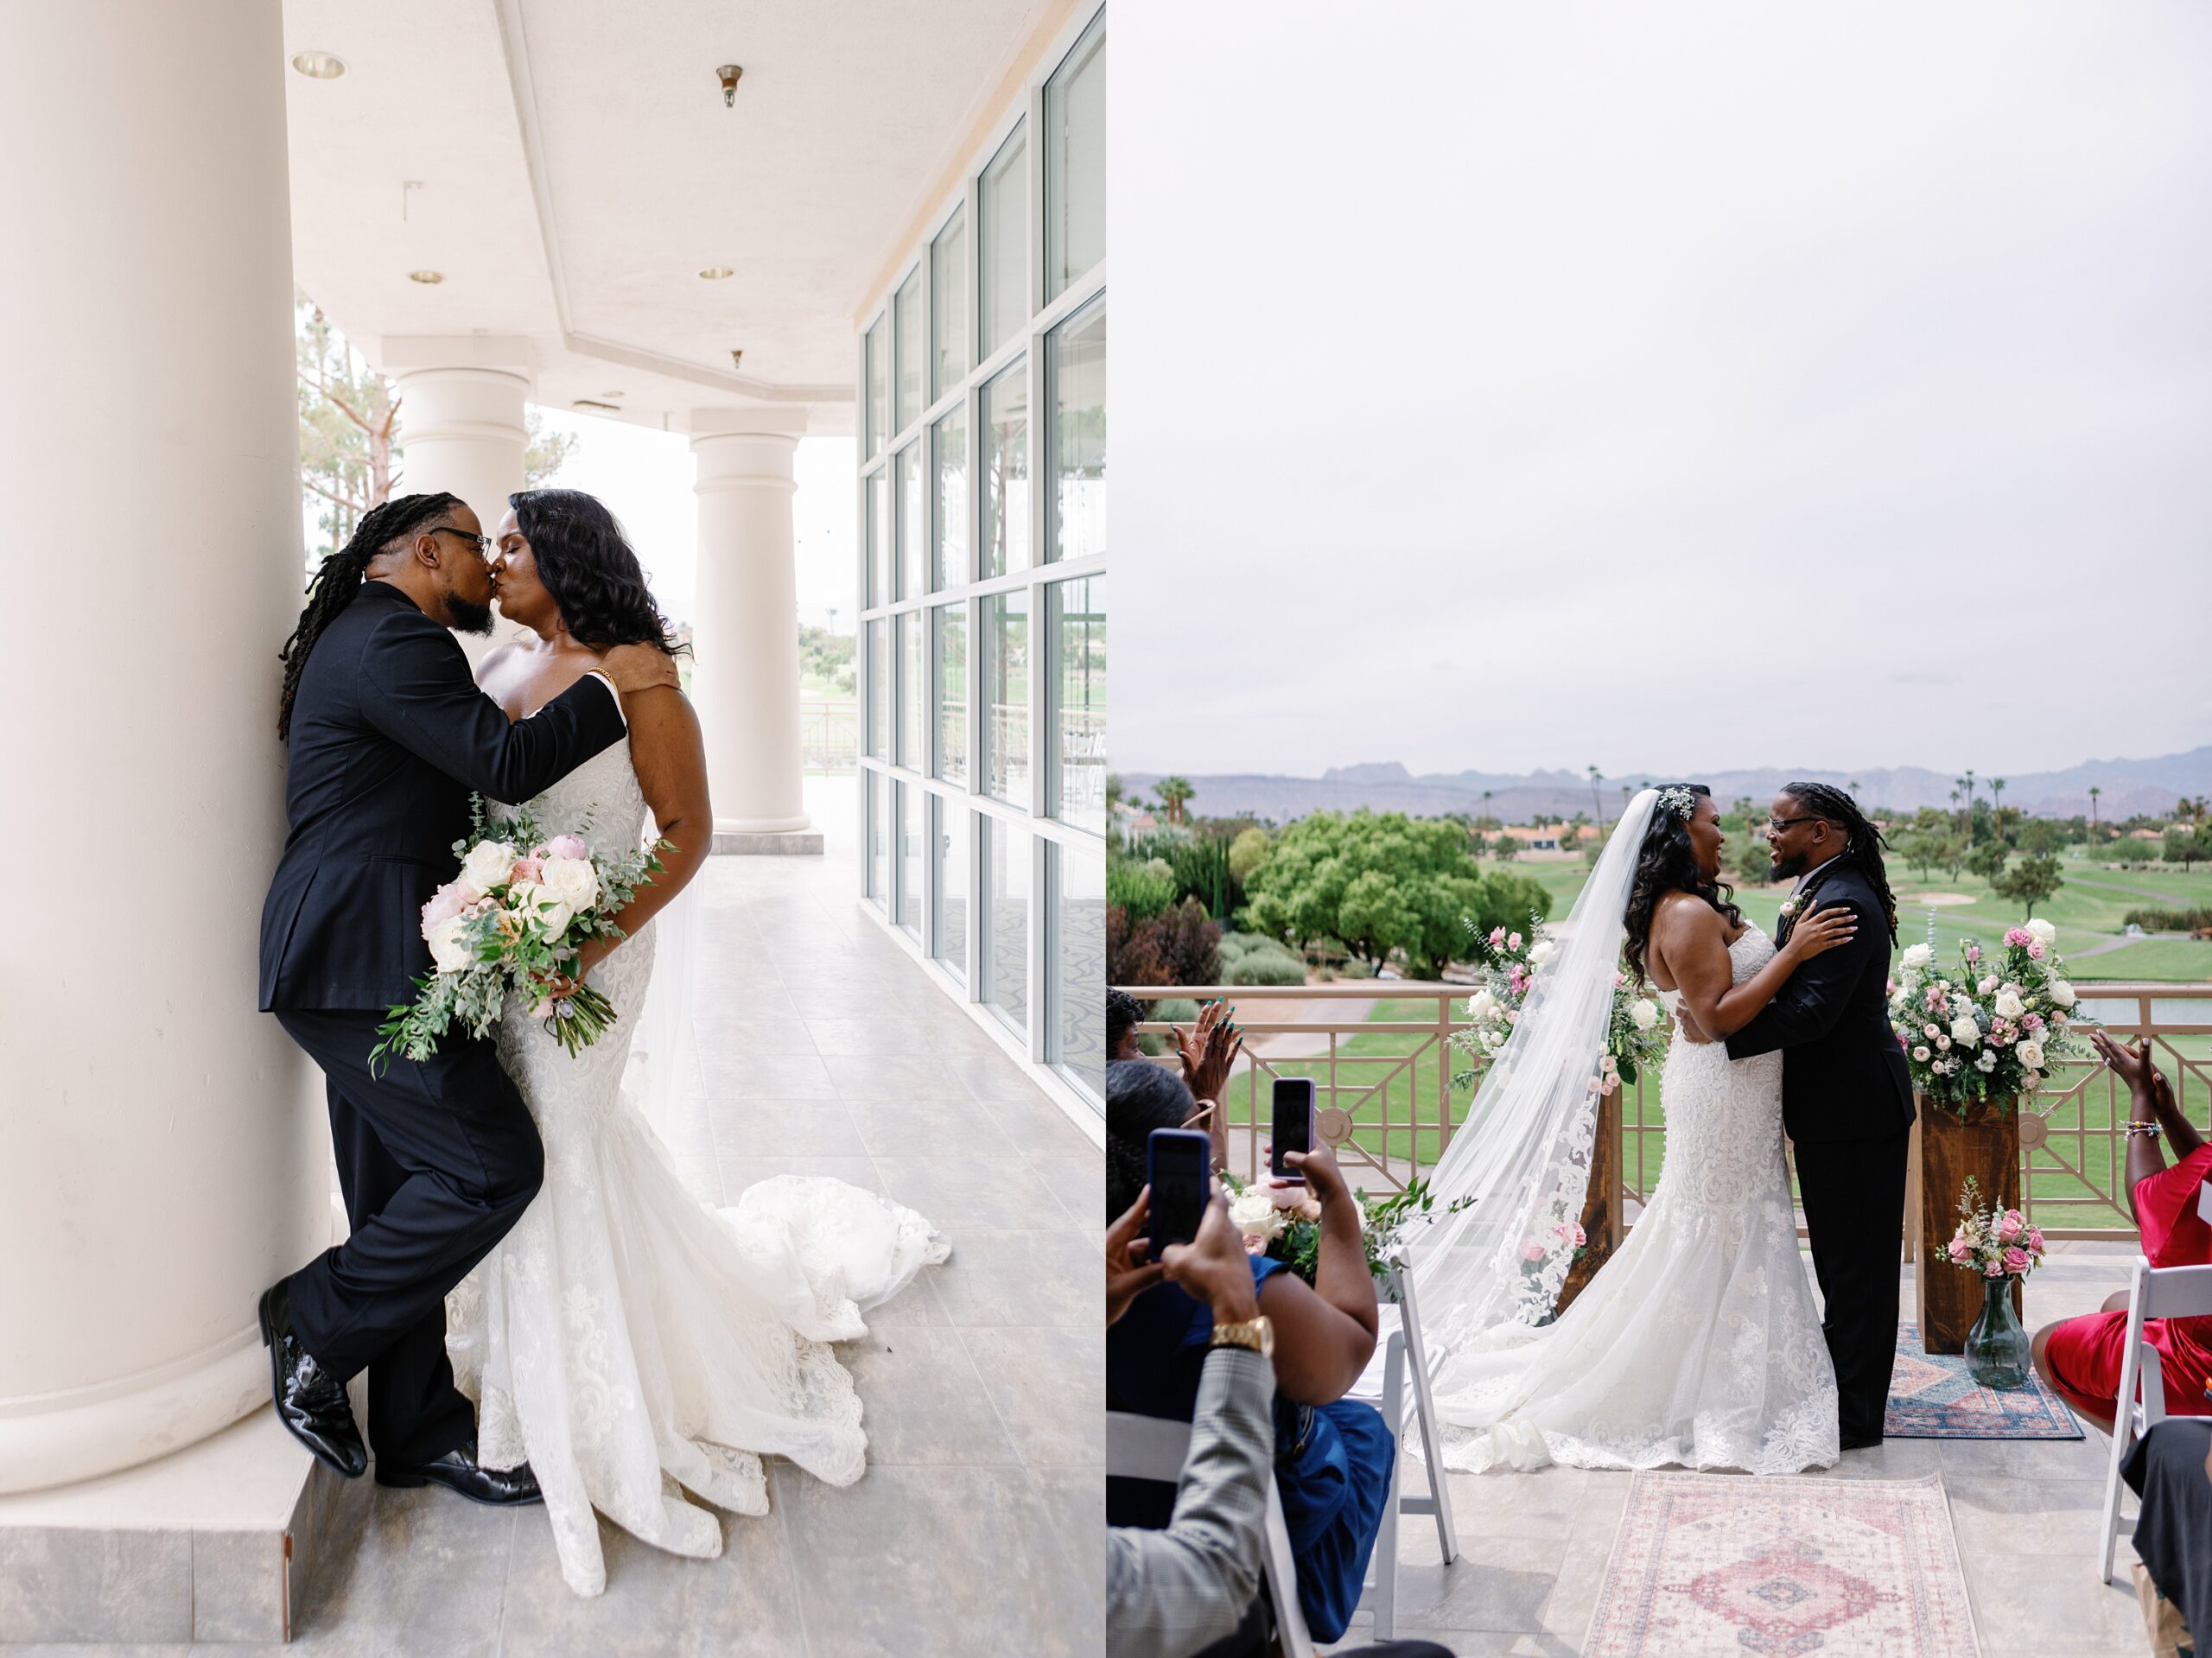 Las-Vegas Golf Course Wedding couple sharing first kiss while overlooking the golf course on a stunning balcony